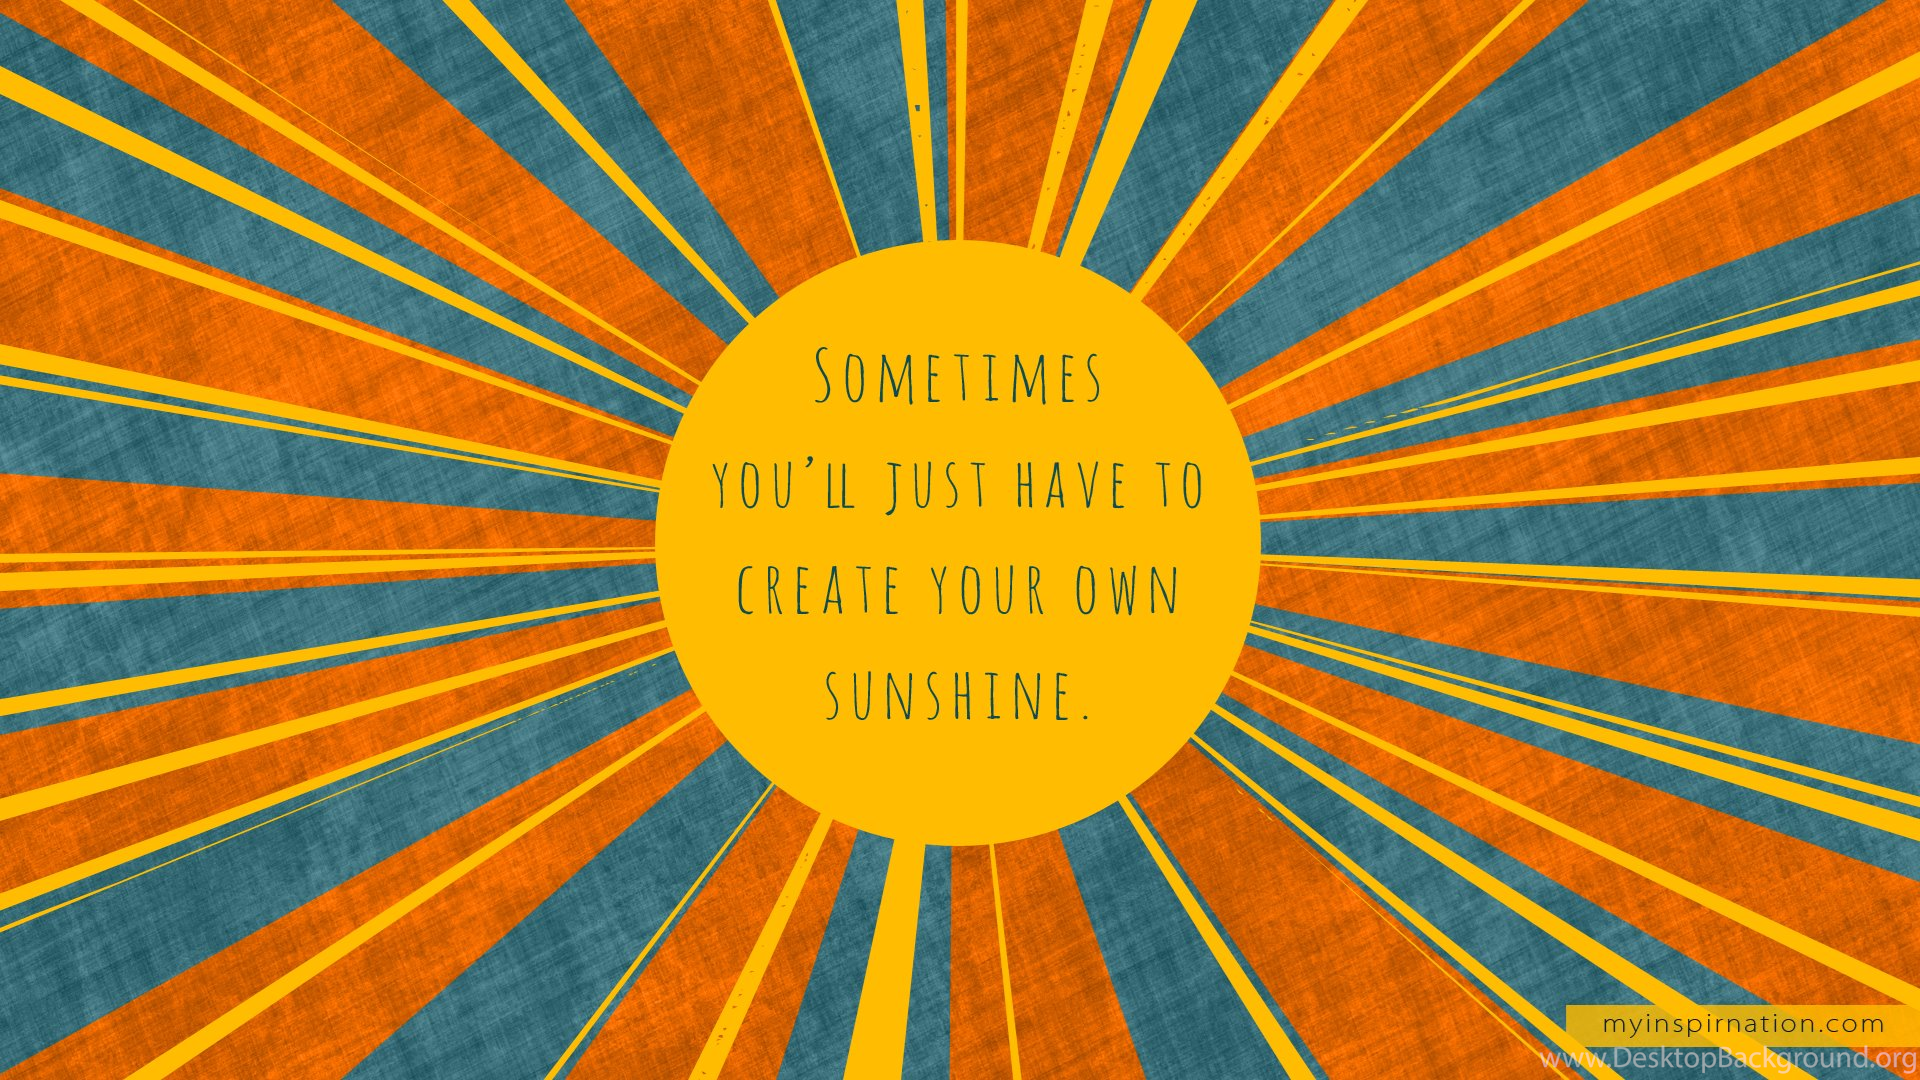 Make Your Own Sunshine Create 1920x1080 Hd Wallpapers And Free